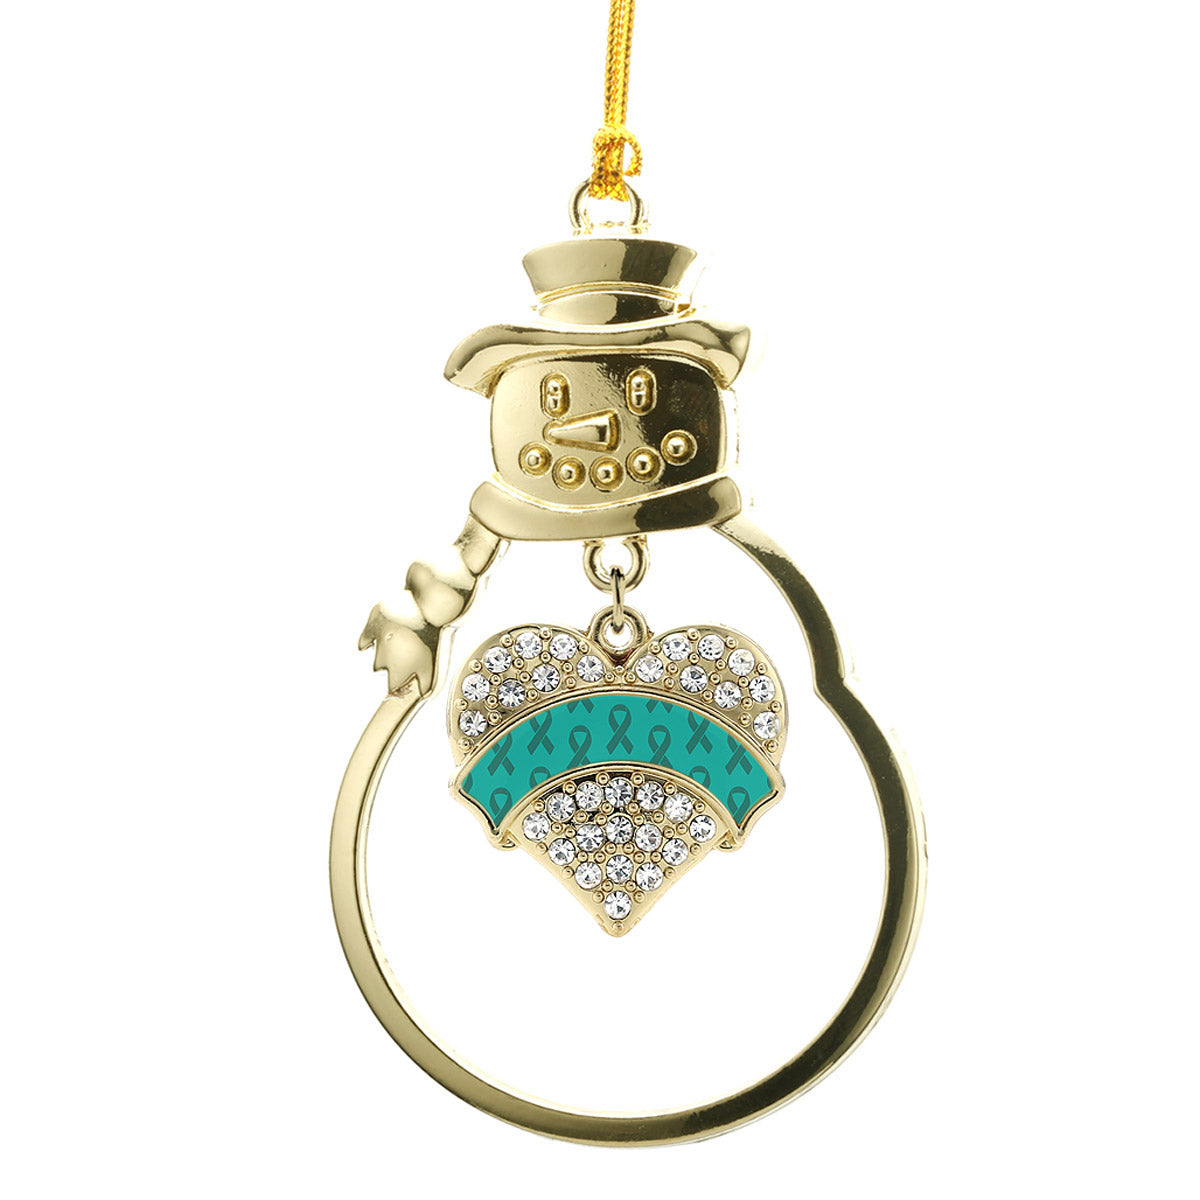 Gold Teal Ribbon Support Pave Heart Charm Snowman Ornament